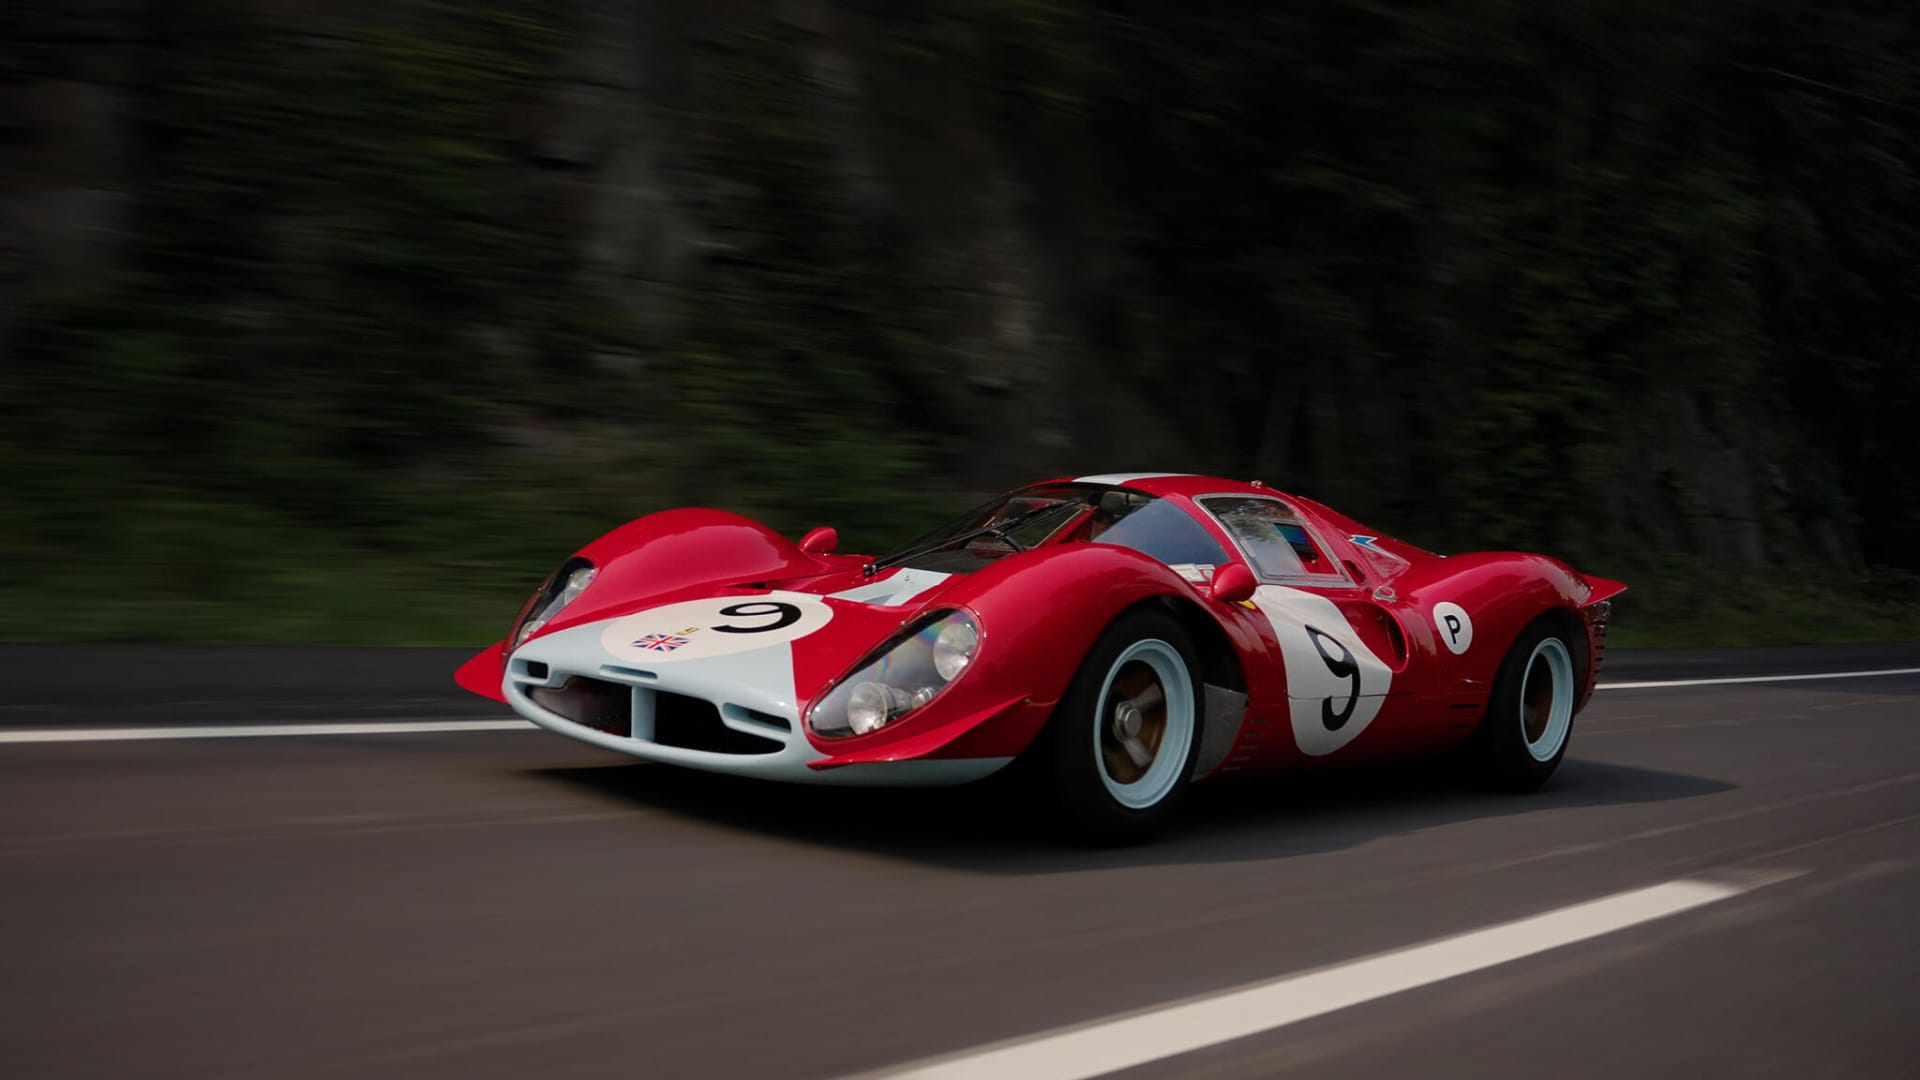 The most expensive cars sold at Pebble Beach, even amid disappointing auctions